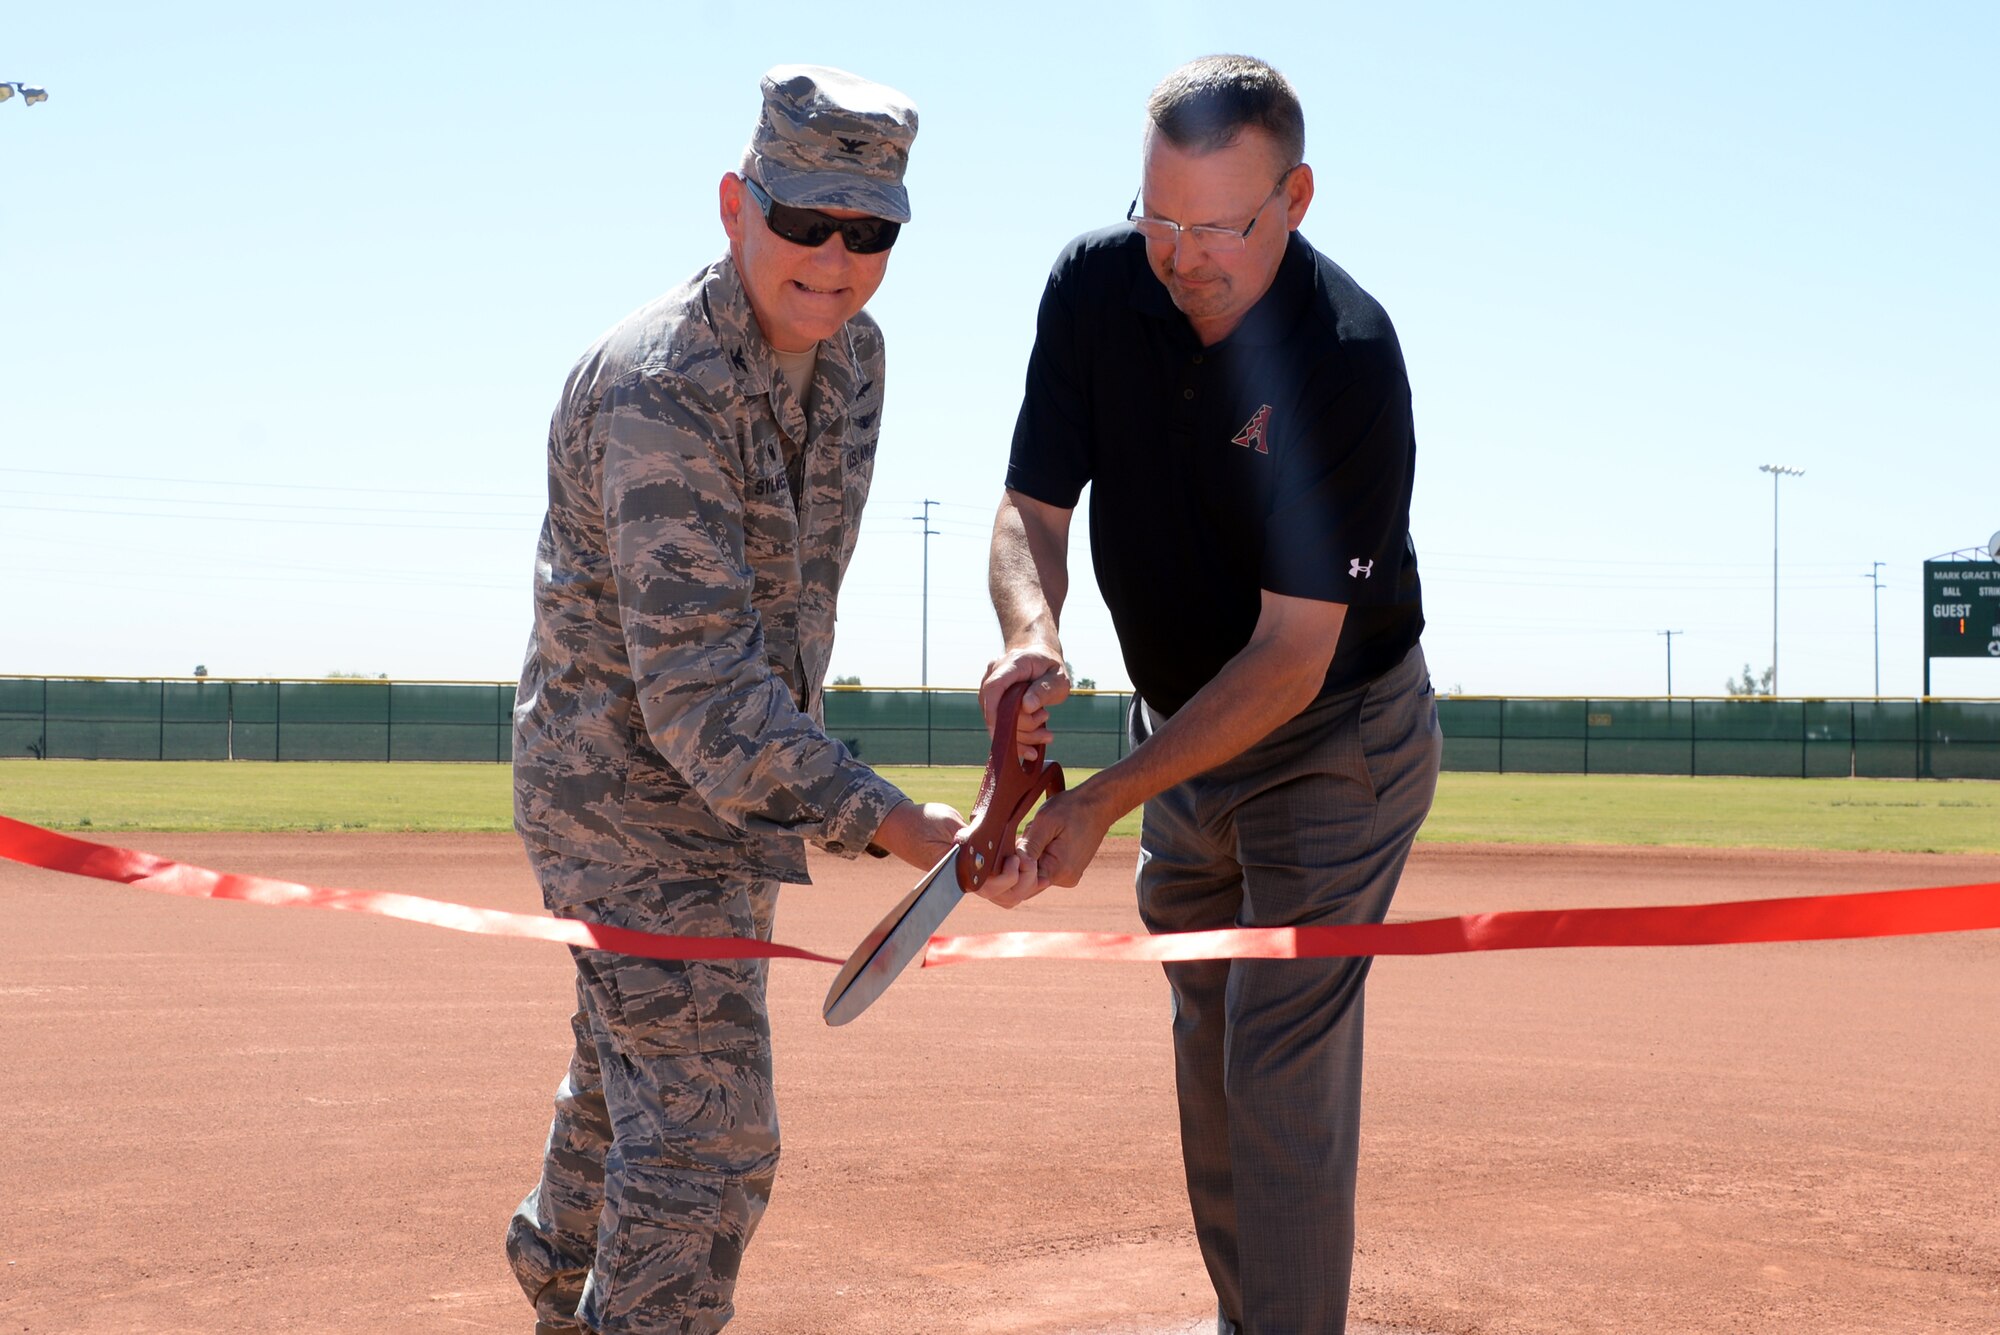 Col. Robert Sylvester, 56th Mission Support Group commander, and Mark Grace, former Arizona Diamondbacks first baseman, cut a ribbon during the scoreboard ribbon cutting ceremony April 23, 2018, at Luke Air Force Base, Ariz. The Diamondbacks, together with Arizona Public Service, presented Luke AFB with a new scoreboard for field number three. (U.S. Air Force photo by Senior Airman Devante Williams)